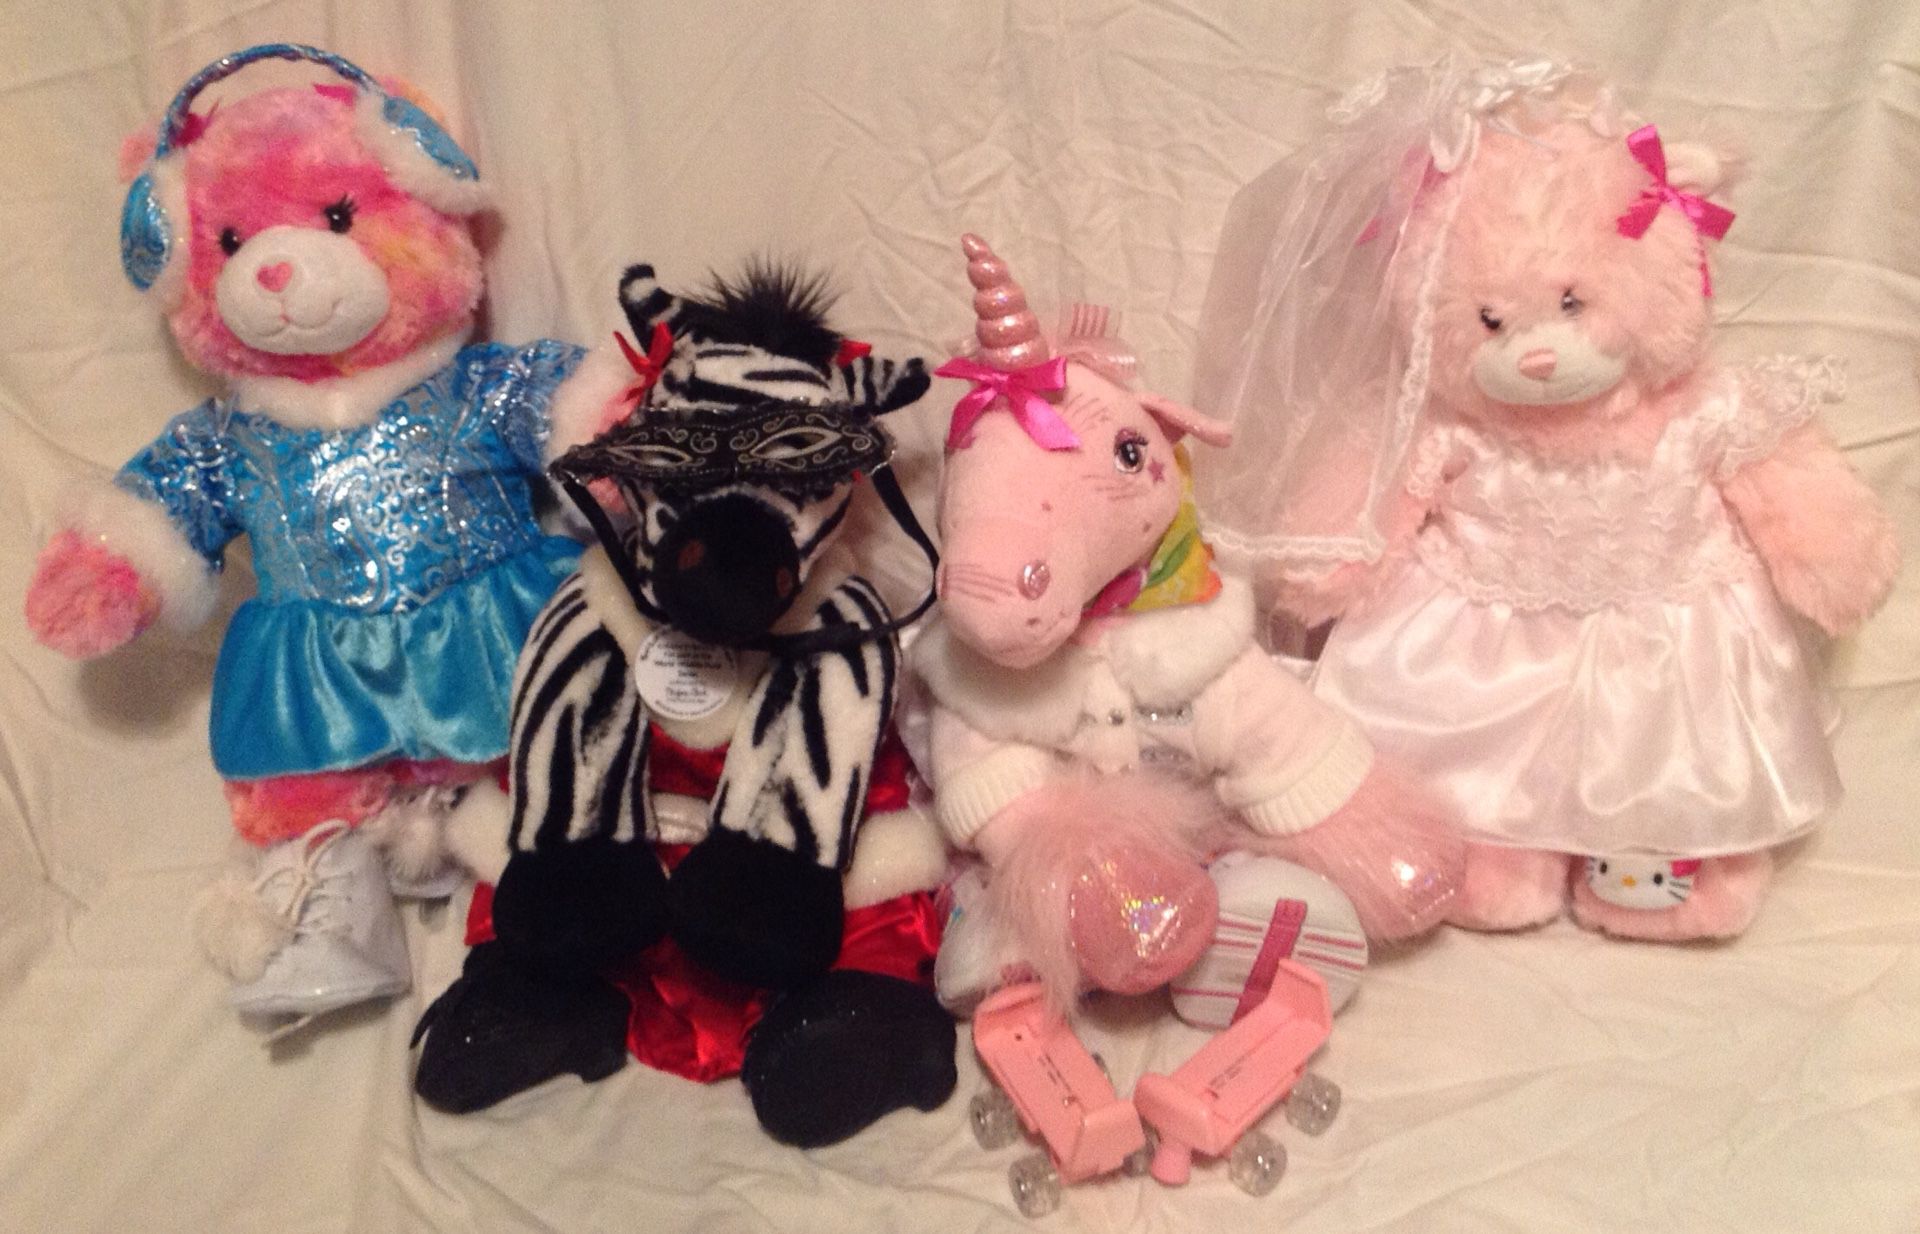 Various BuildaBear plushies with outfits and accessories